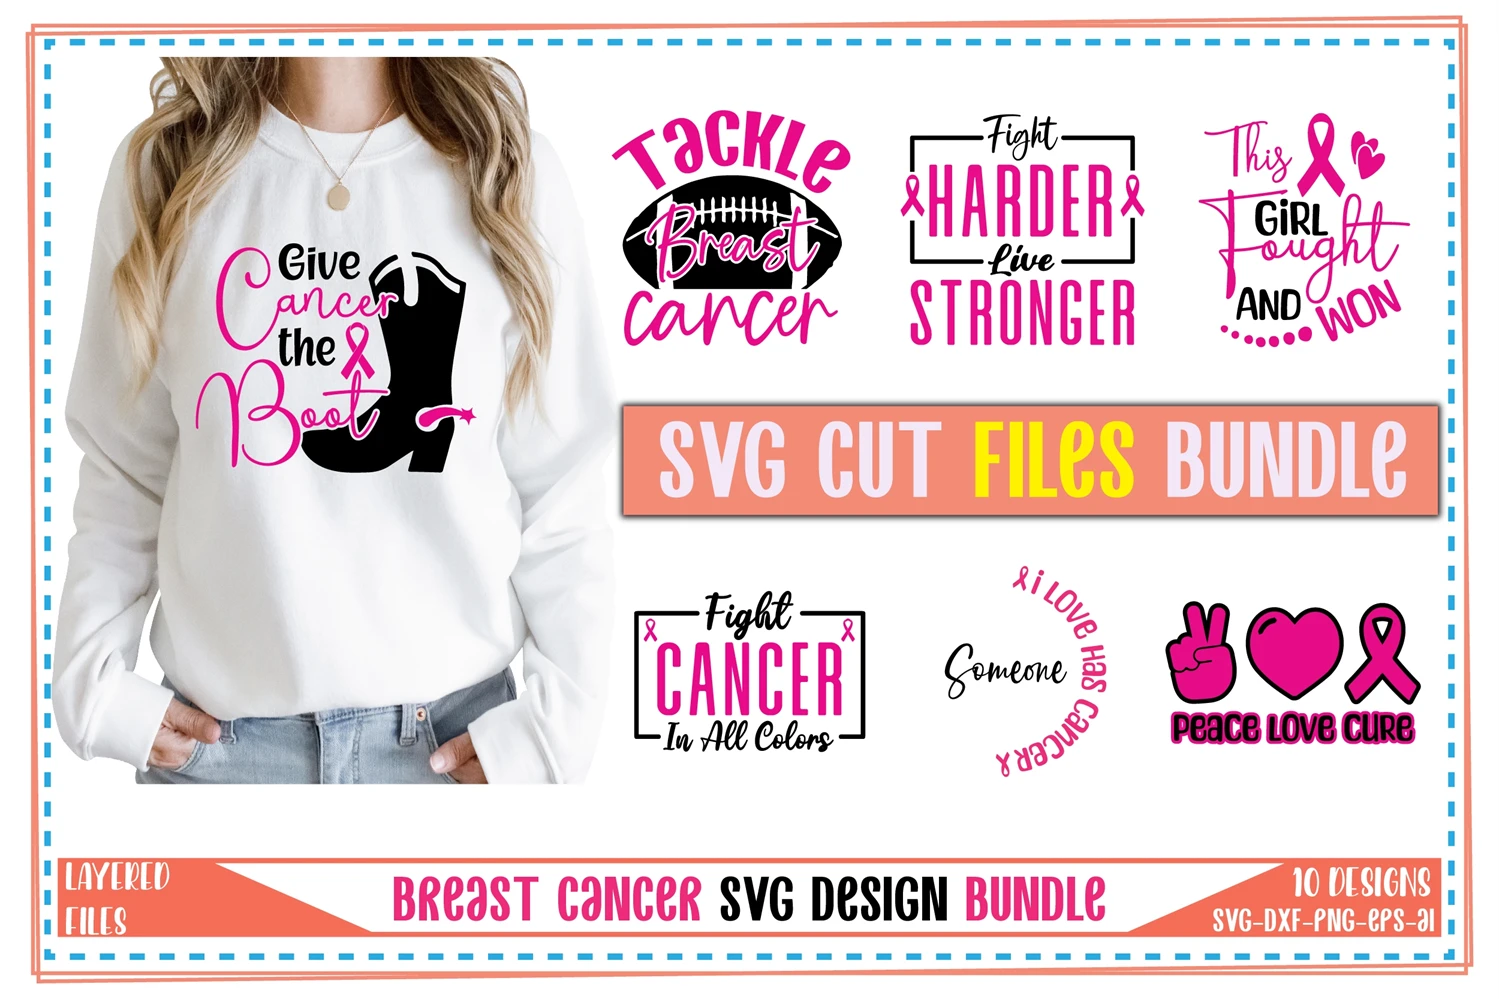 Tackle breast cancer SVG vector for print-ready t-shirts design - Buy t- shirt designs